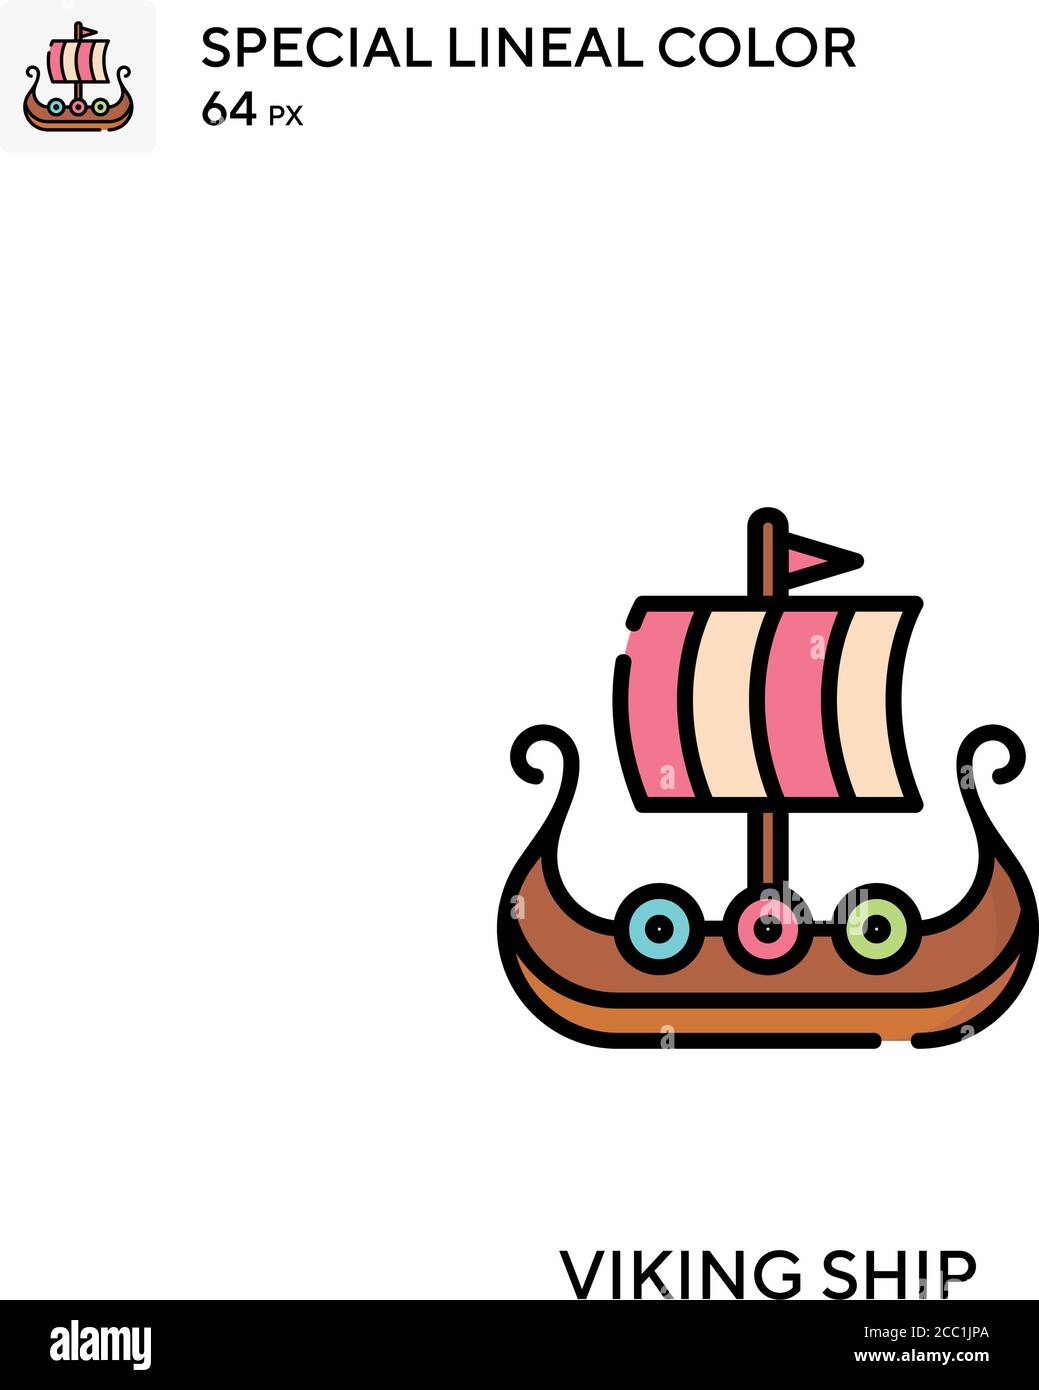 Viking ship Special lineal color vector icon. Viking ship icons for your business project Stock Vector